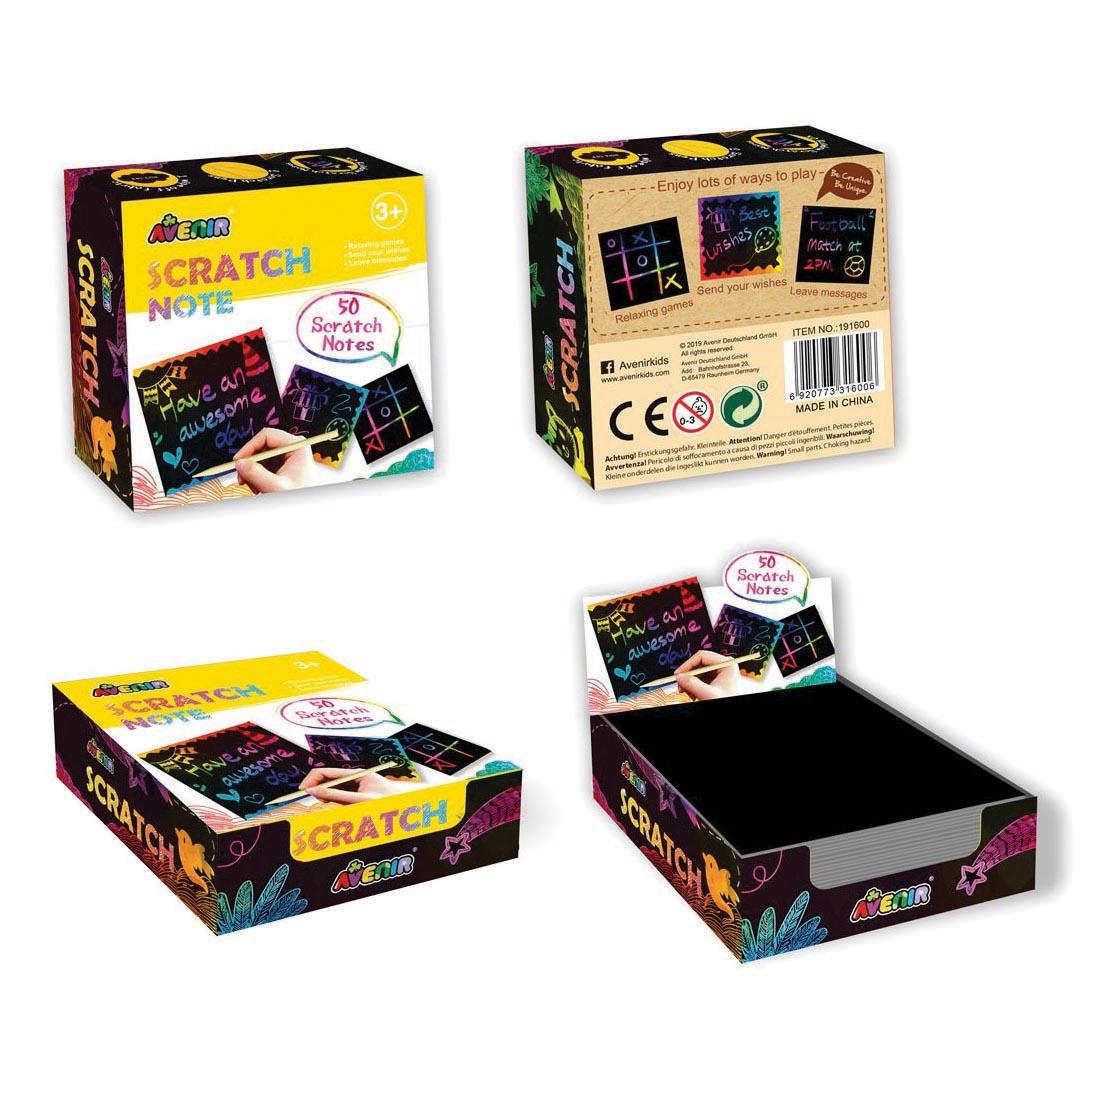 Front, Back, Open and Closed Packages of Scratch Note Paper by Avenir